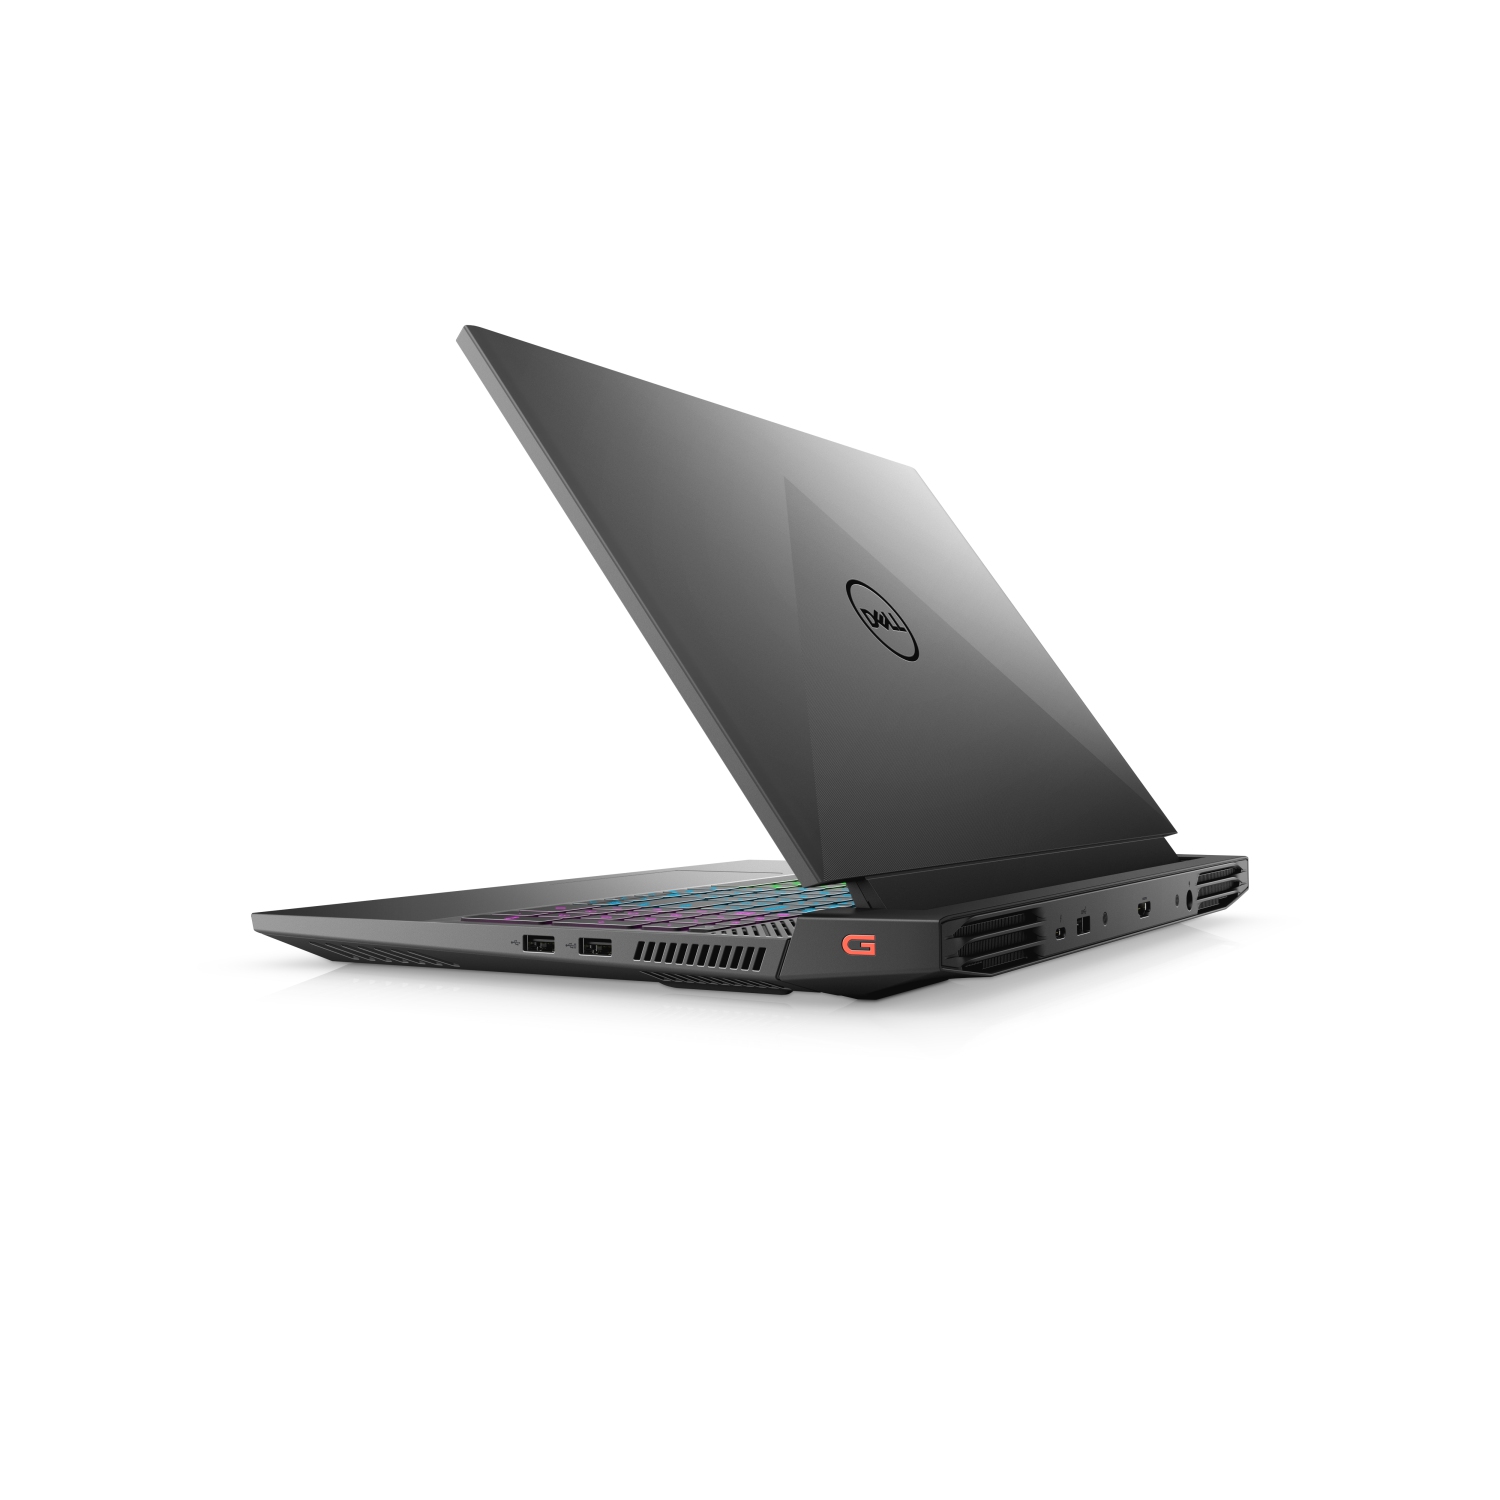 Refurbished (Excellent) - Dell G15 5511 Gaming Laptop (2021), 15.6" FHD, Core i7 - 512GB SSD - 16GB RAM - 3050 Ti, 8 Cores @ 4.6 GHz - 11th Gen CPU Certified Refurbished